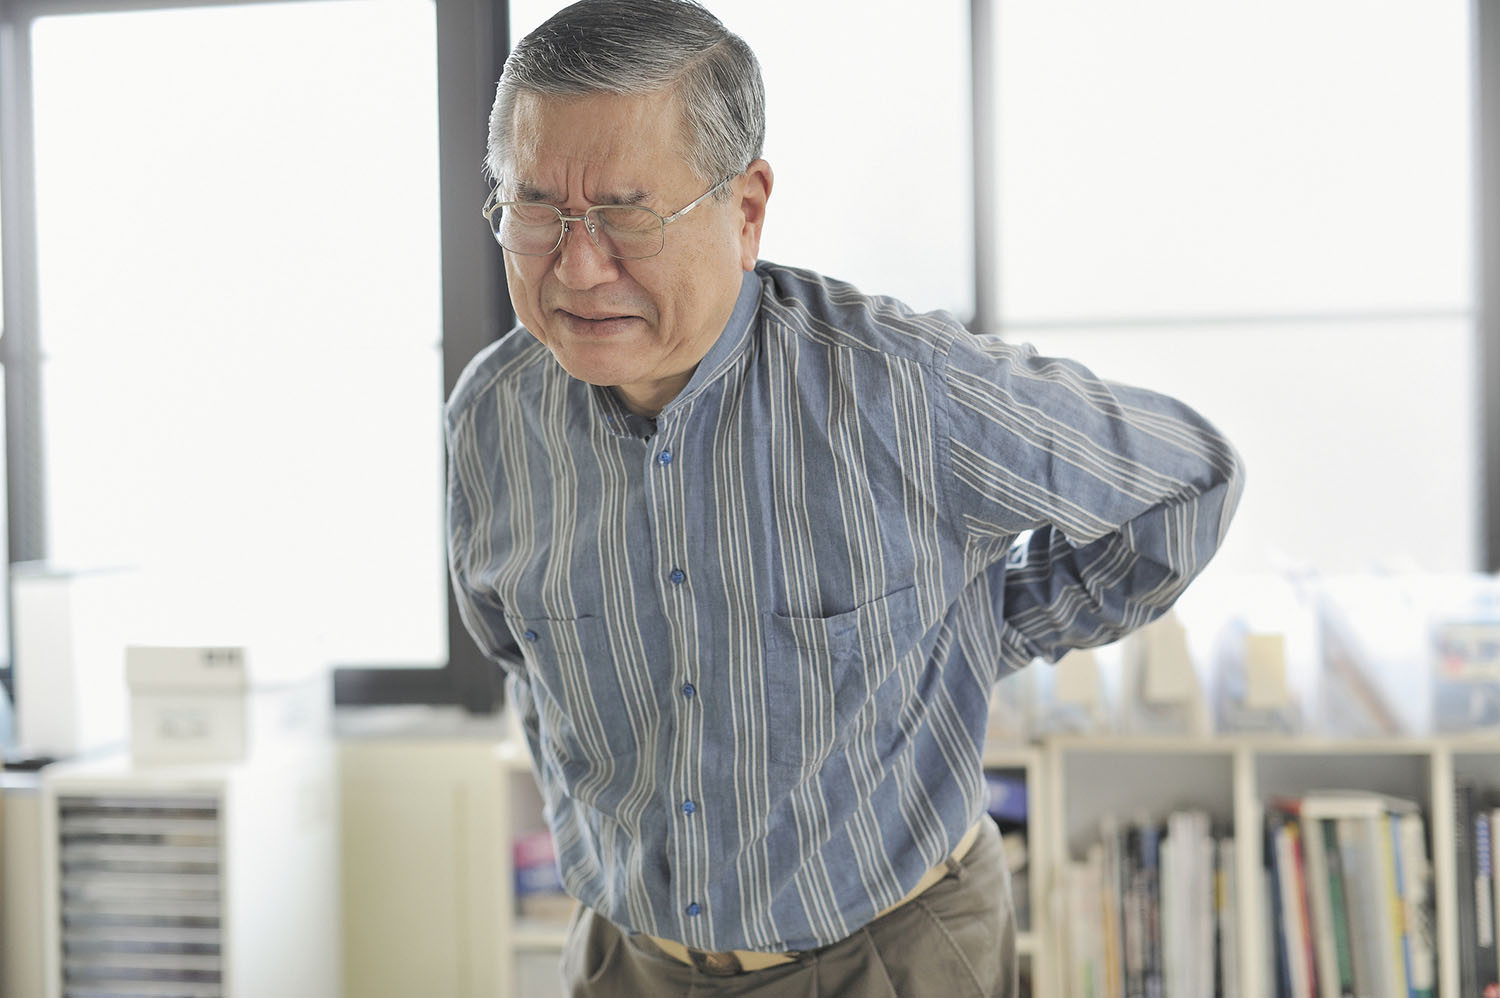 photo of a senior man wincing in pain and reaching his hand around to hold his back